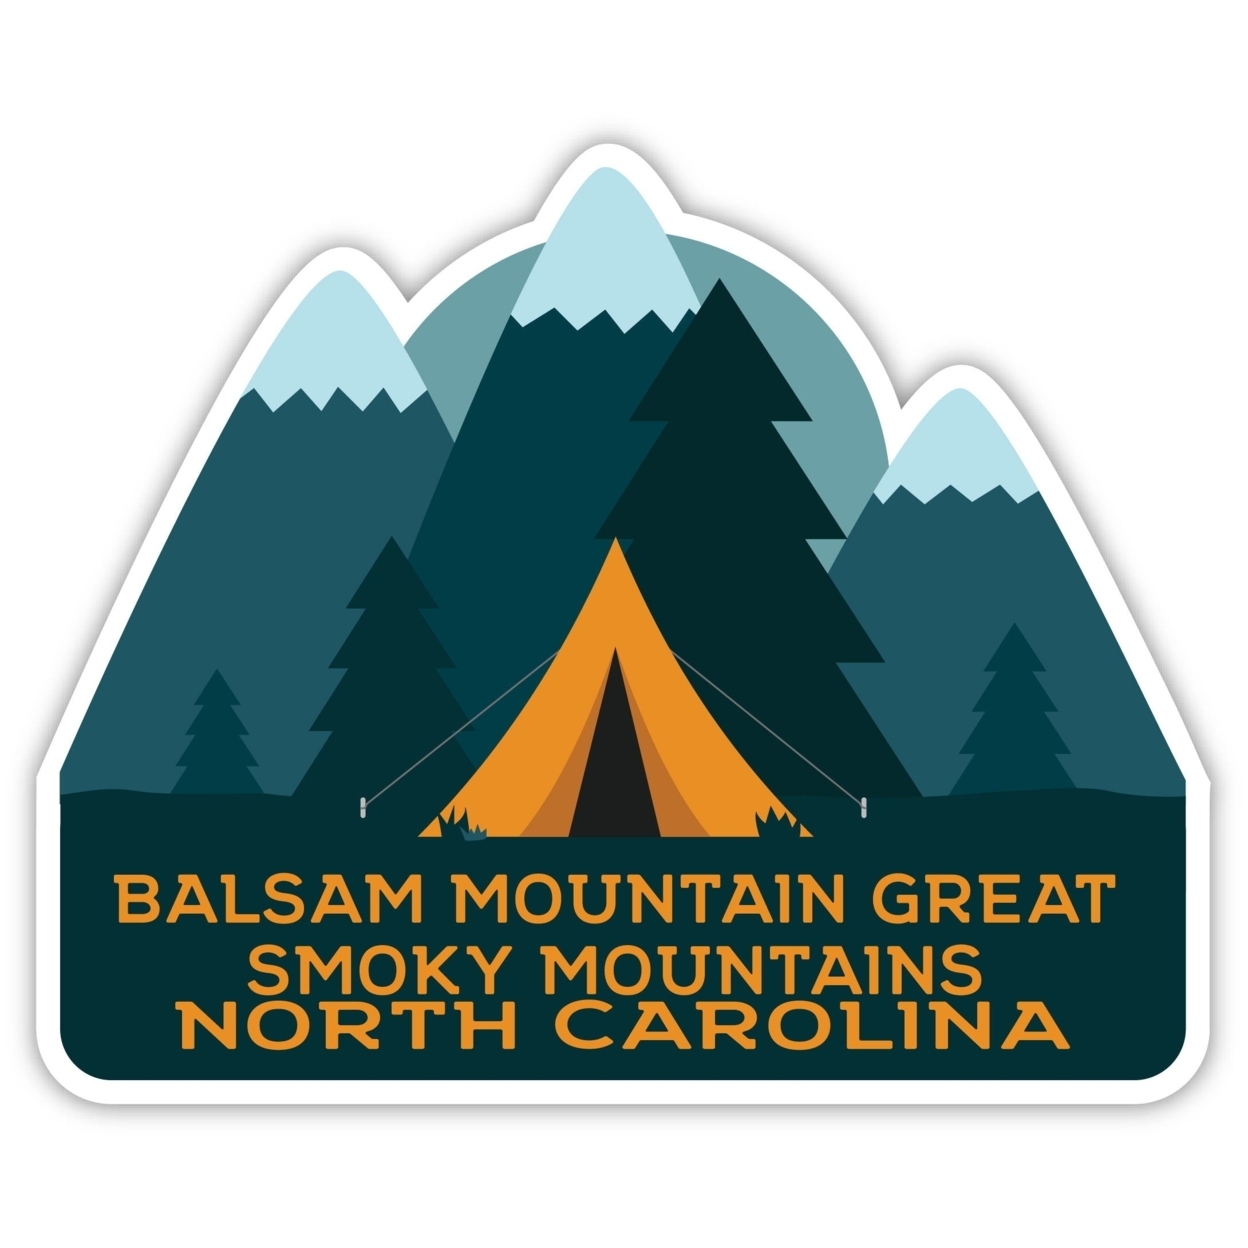 Balsam Mountain Great Smoky Mountains North Carolina Souvenir Decorative Stickers (Choose Theme And Size) - Single Unit, 6-Inch, Tent